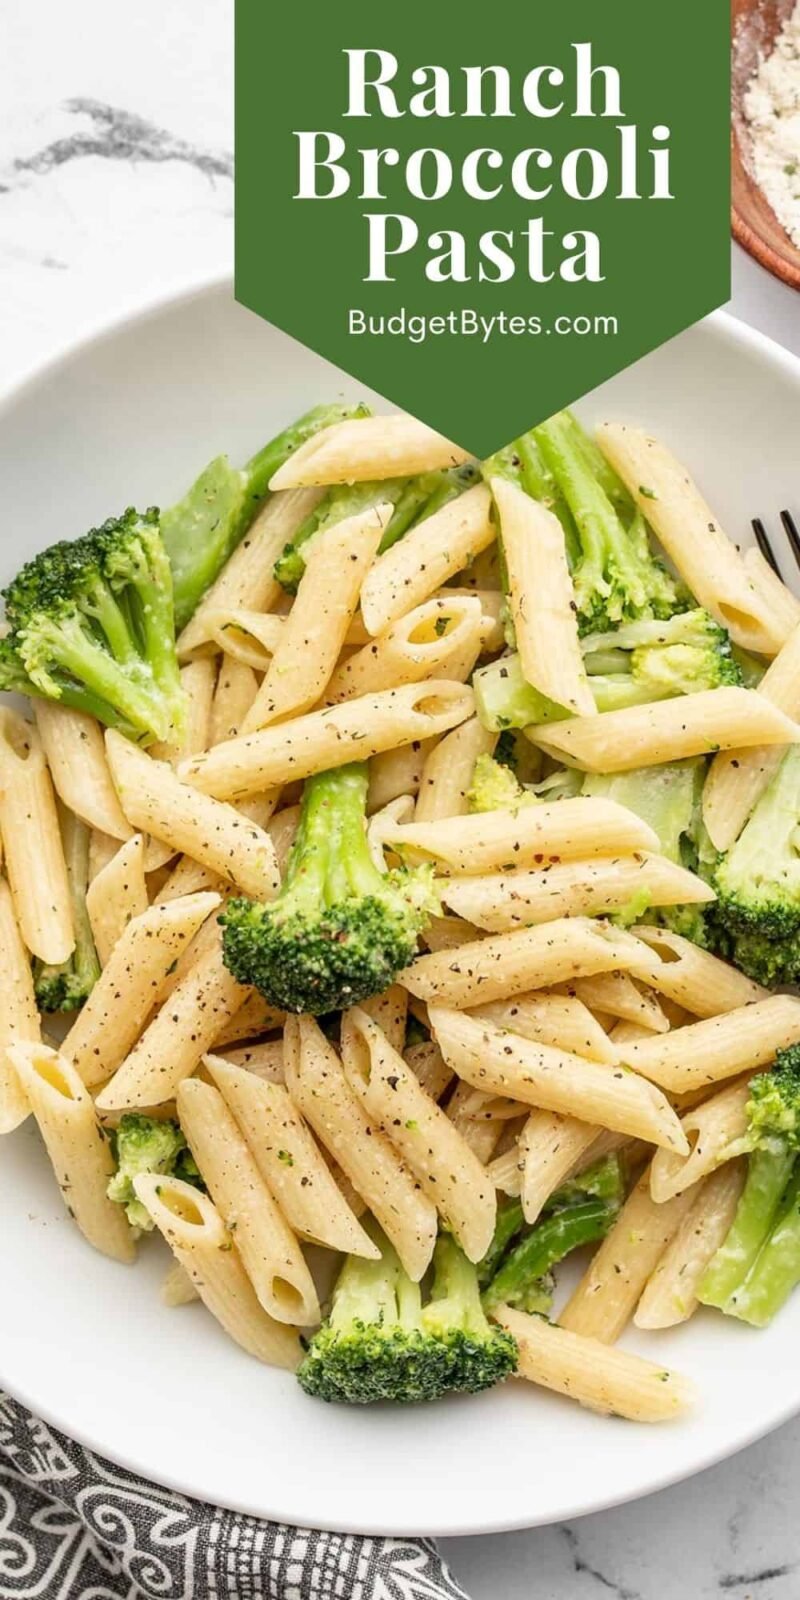 Ranch Broccoli Pasta in a bowl, title text at the top